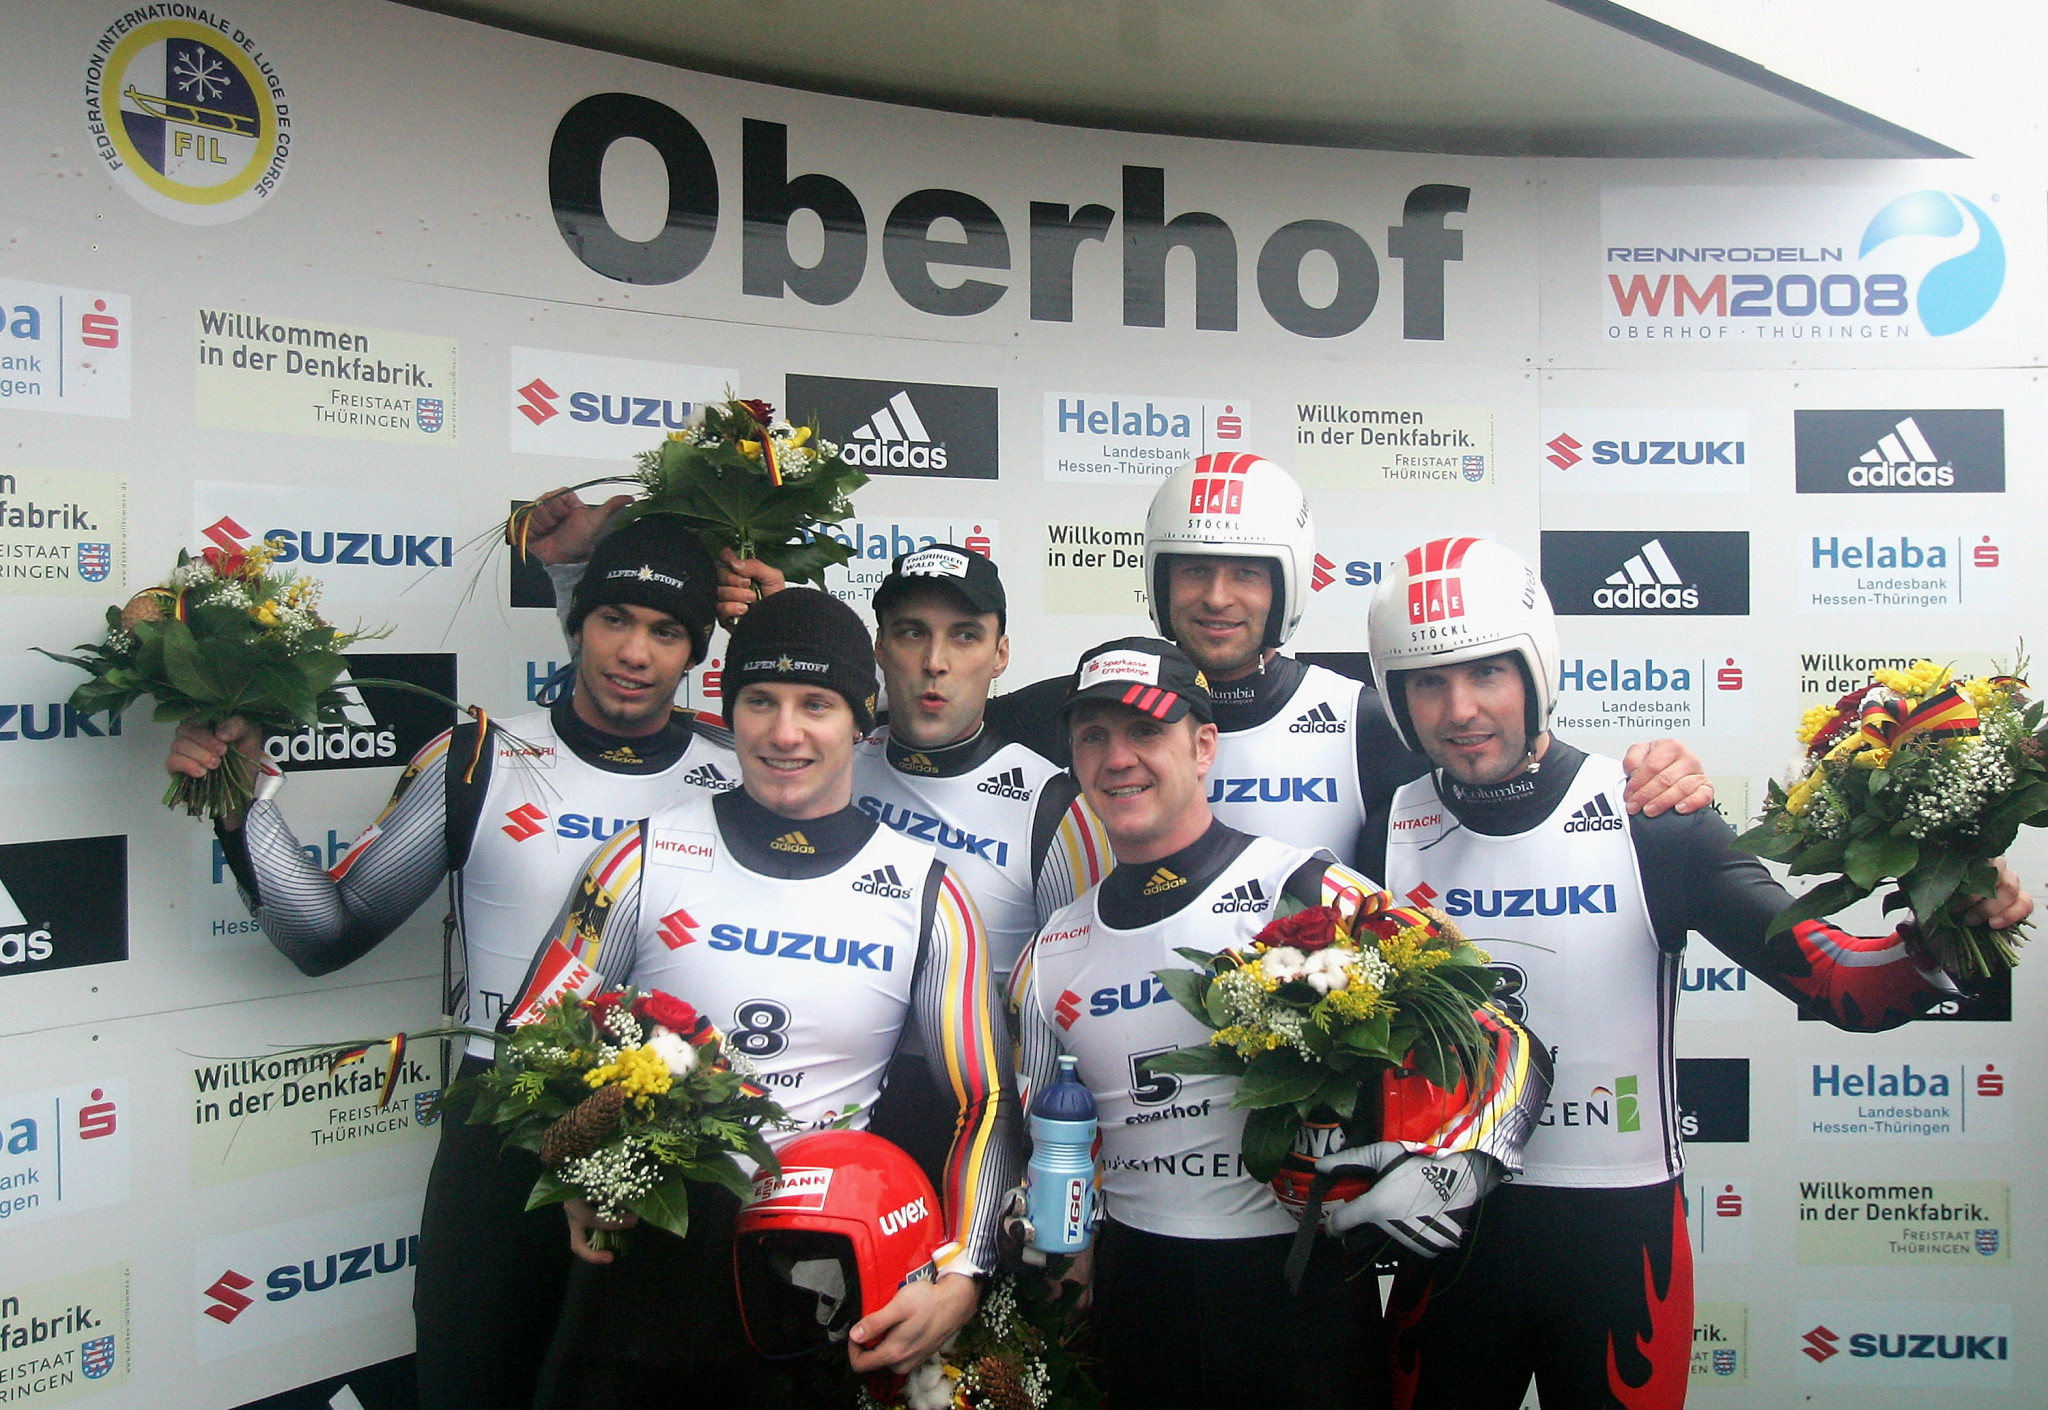 The last time Oberhof hosted the FIL World Championships in 2008 there was almost total domination from Germany, who won nine of the 12 medals, including all four gold ©Getty Images